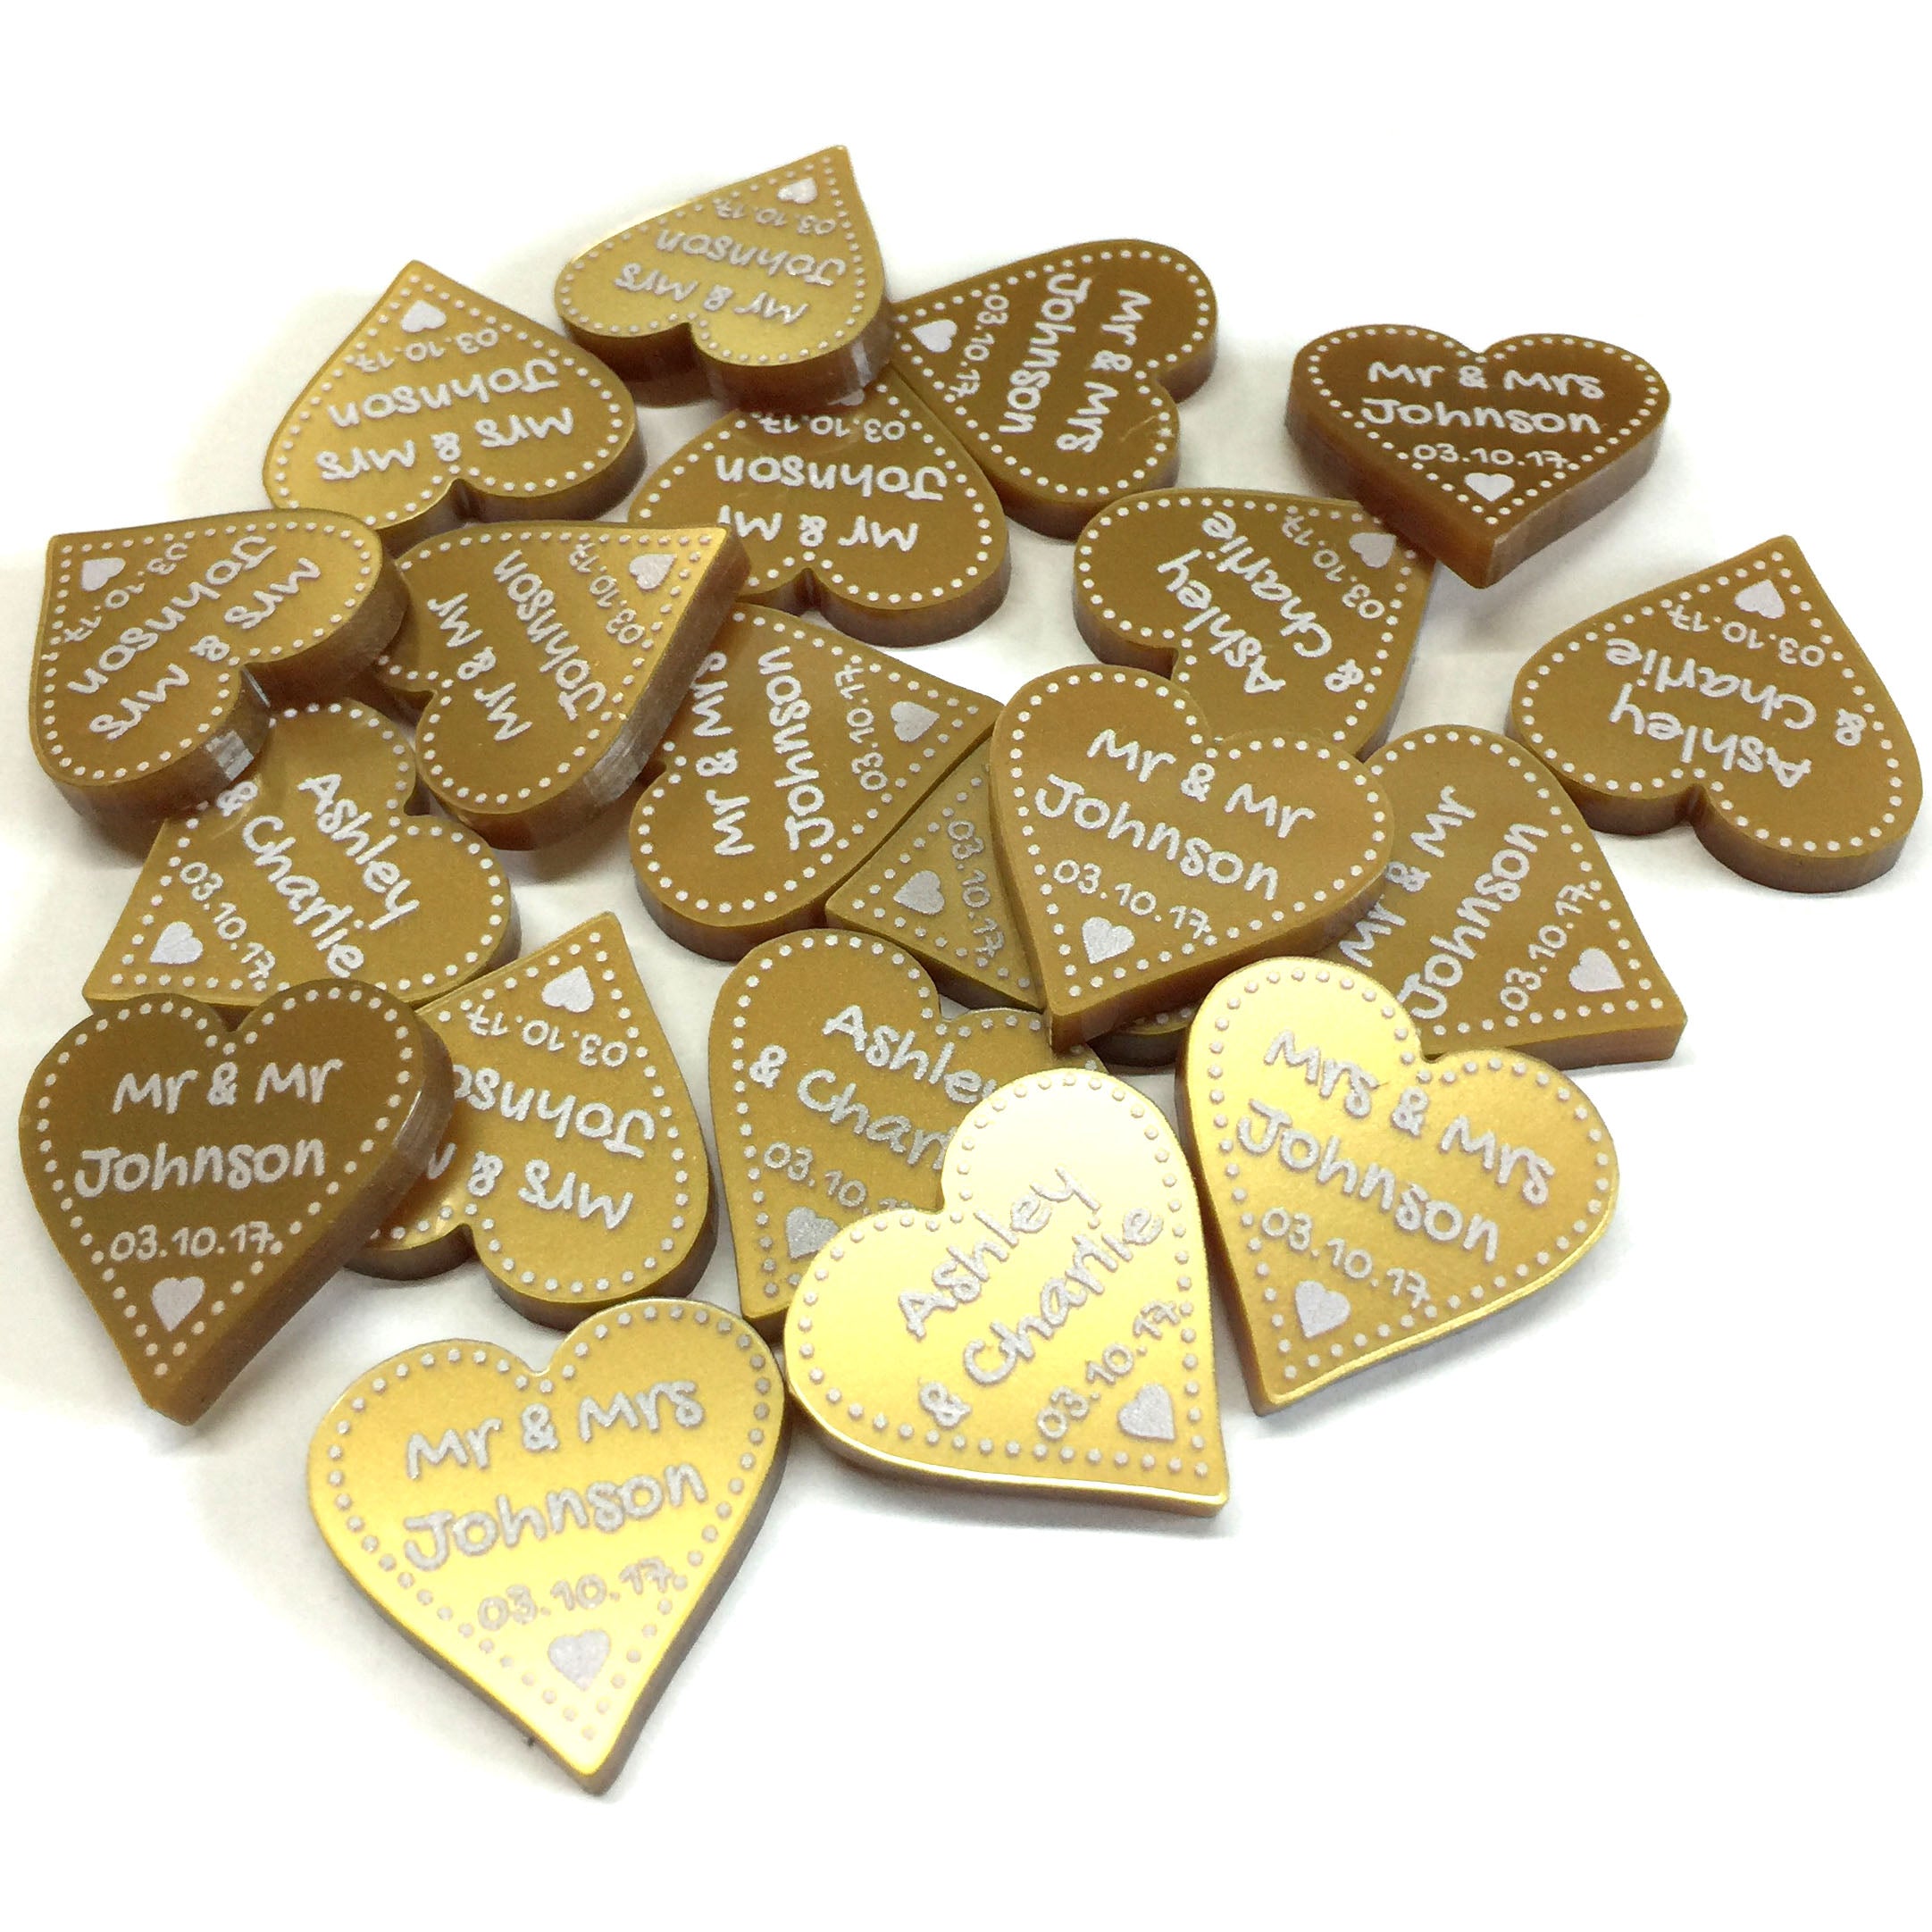 Personalised 50th Anniversary Golden Wedding Decorations - Metallic Gold Acrylic + White Dotty Love Hearts